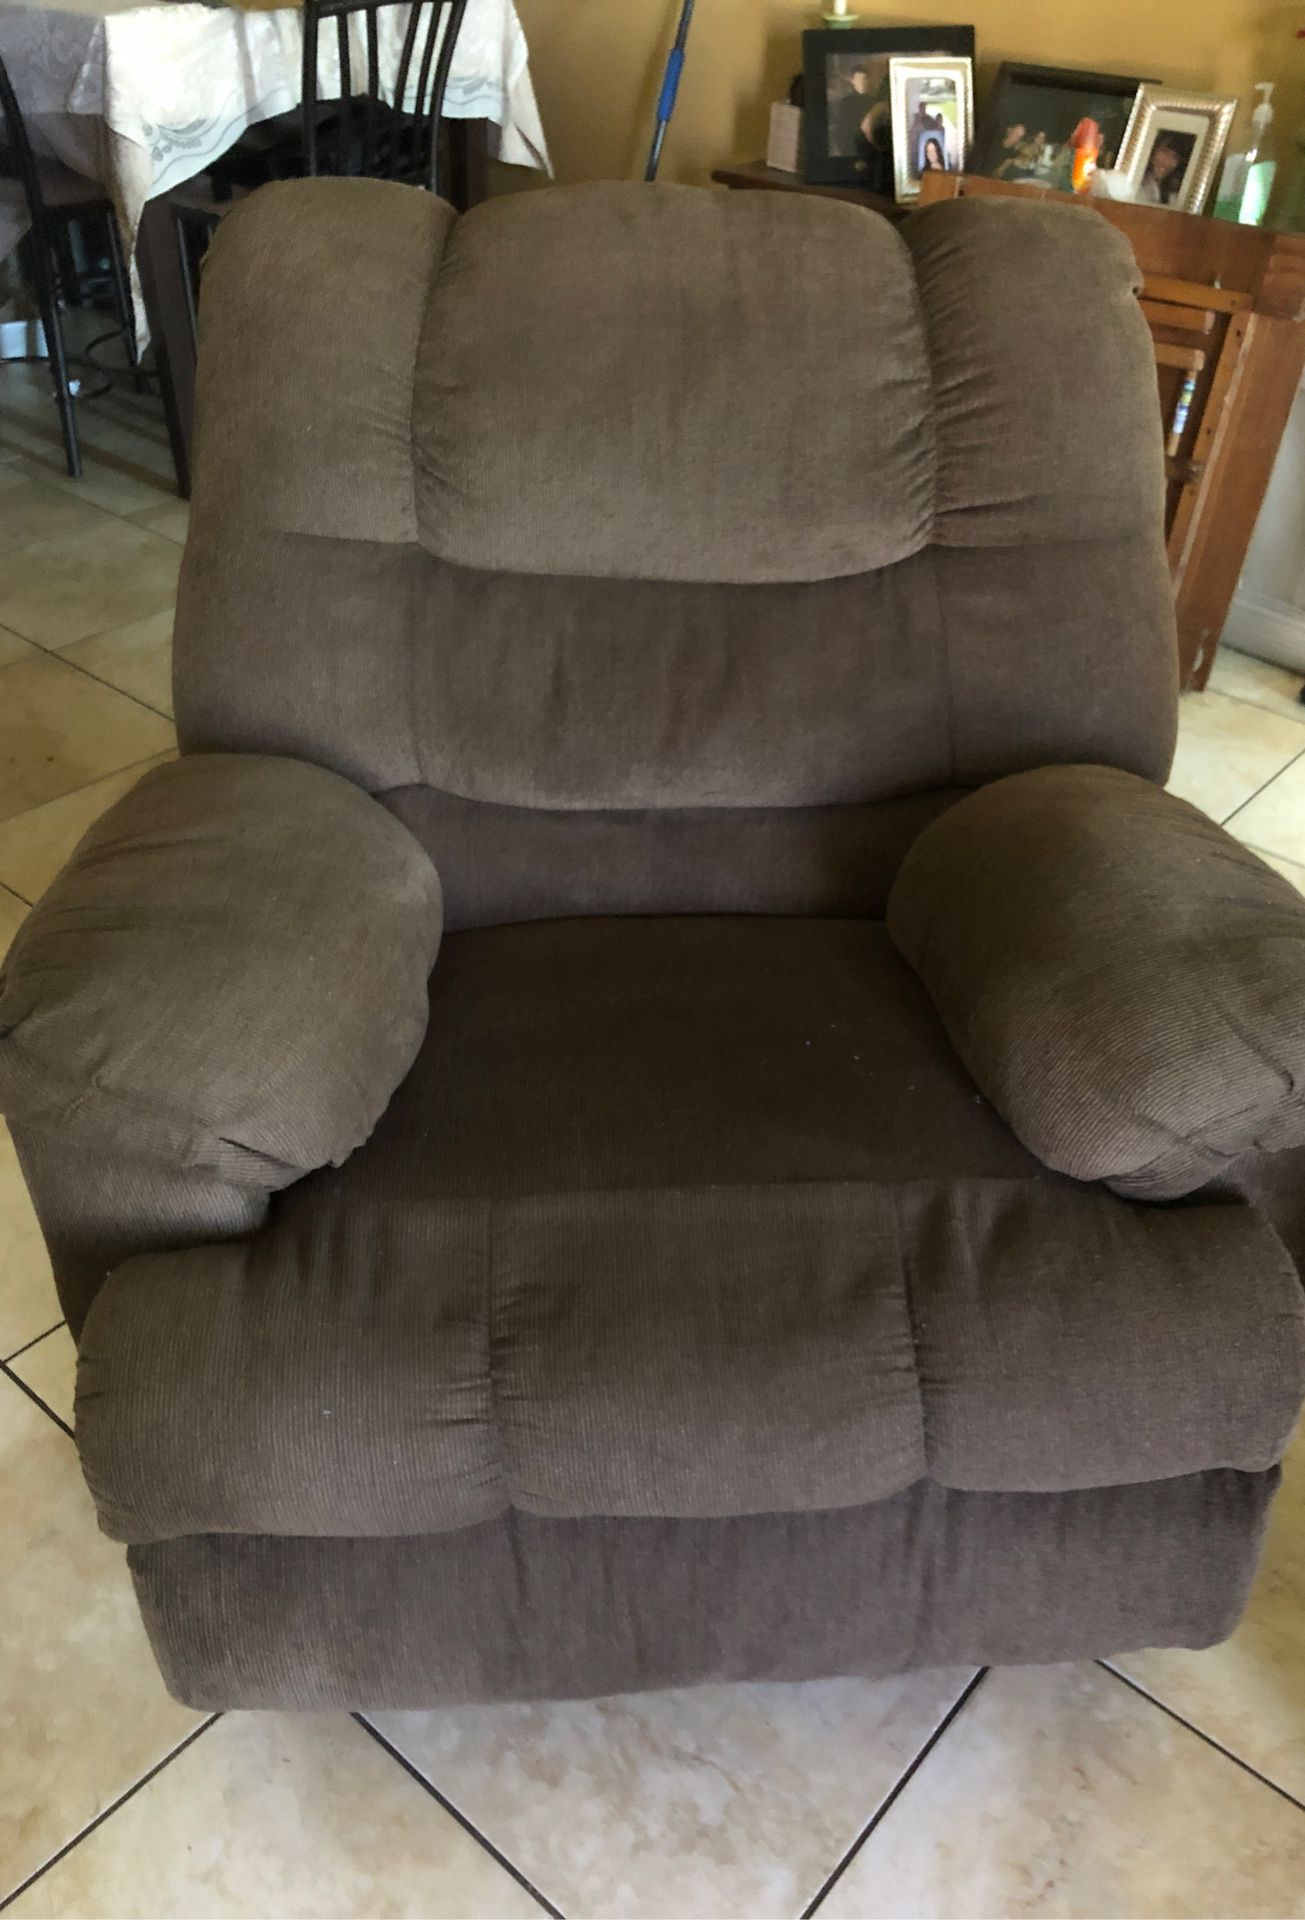 Recliner (2) and 1 chaise